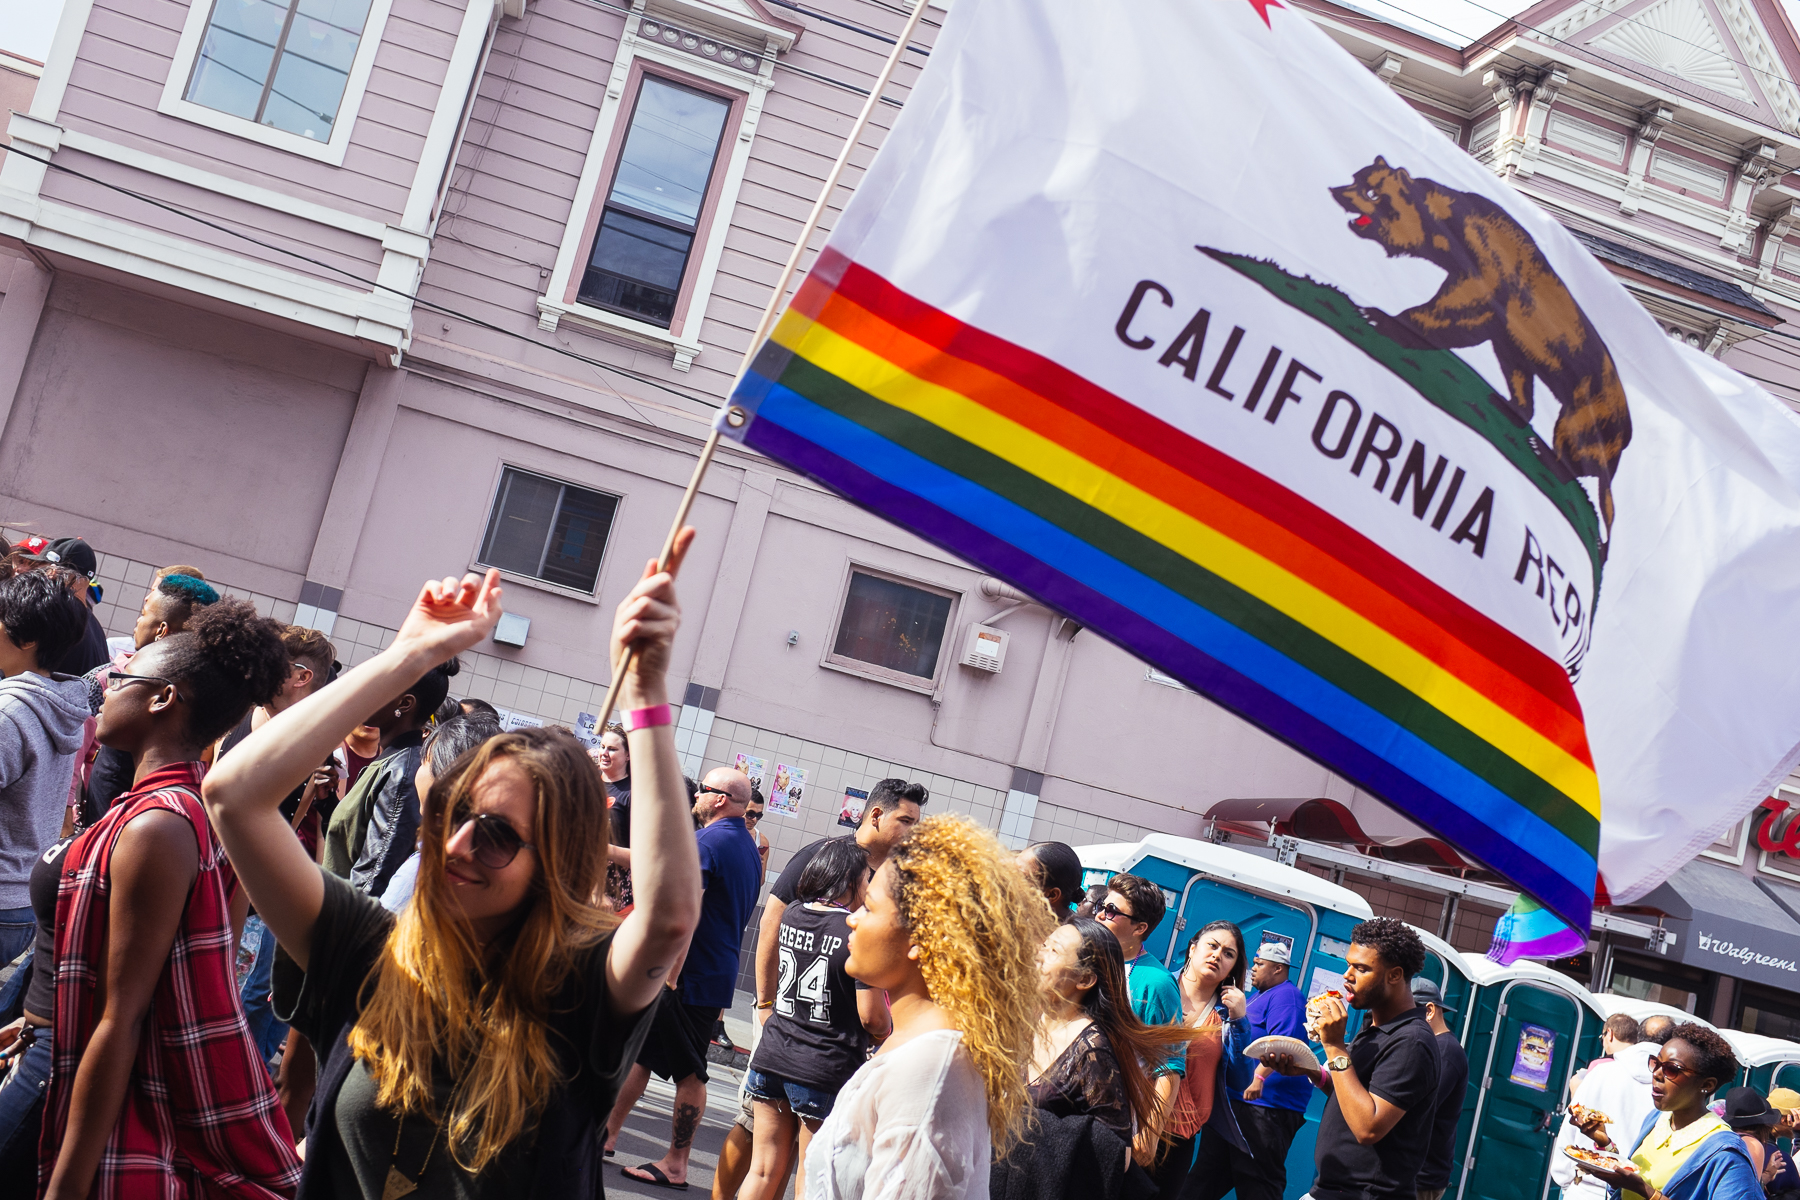 PHOTO GALLERY: I Survived San Francisco Pride, Here's All